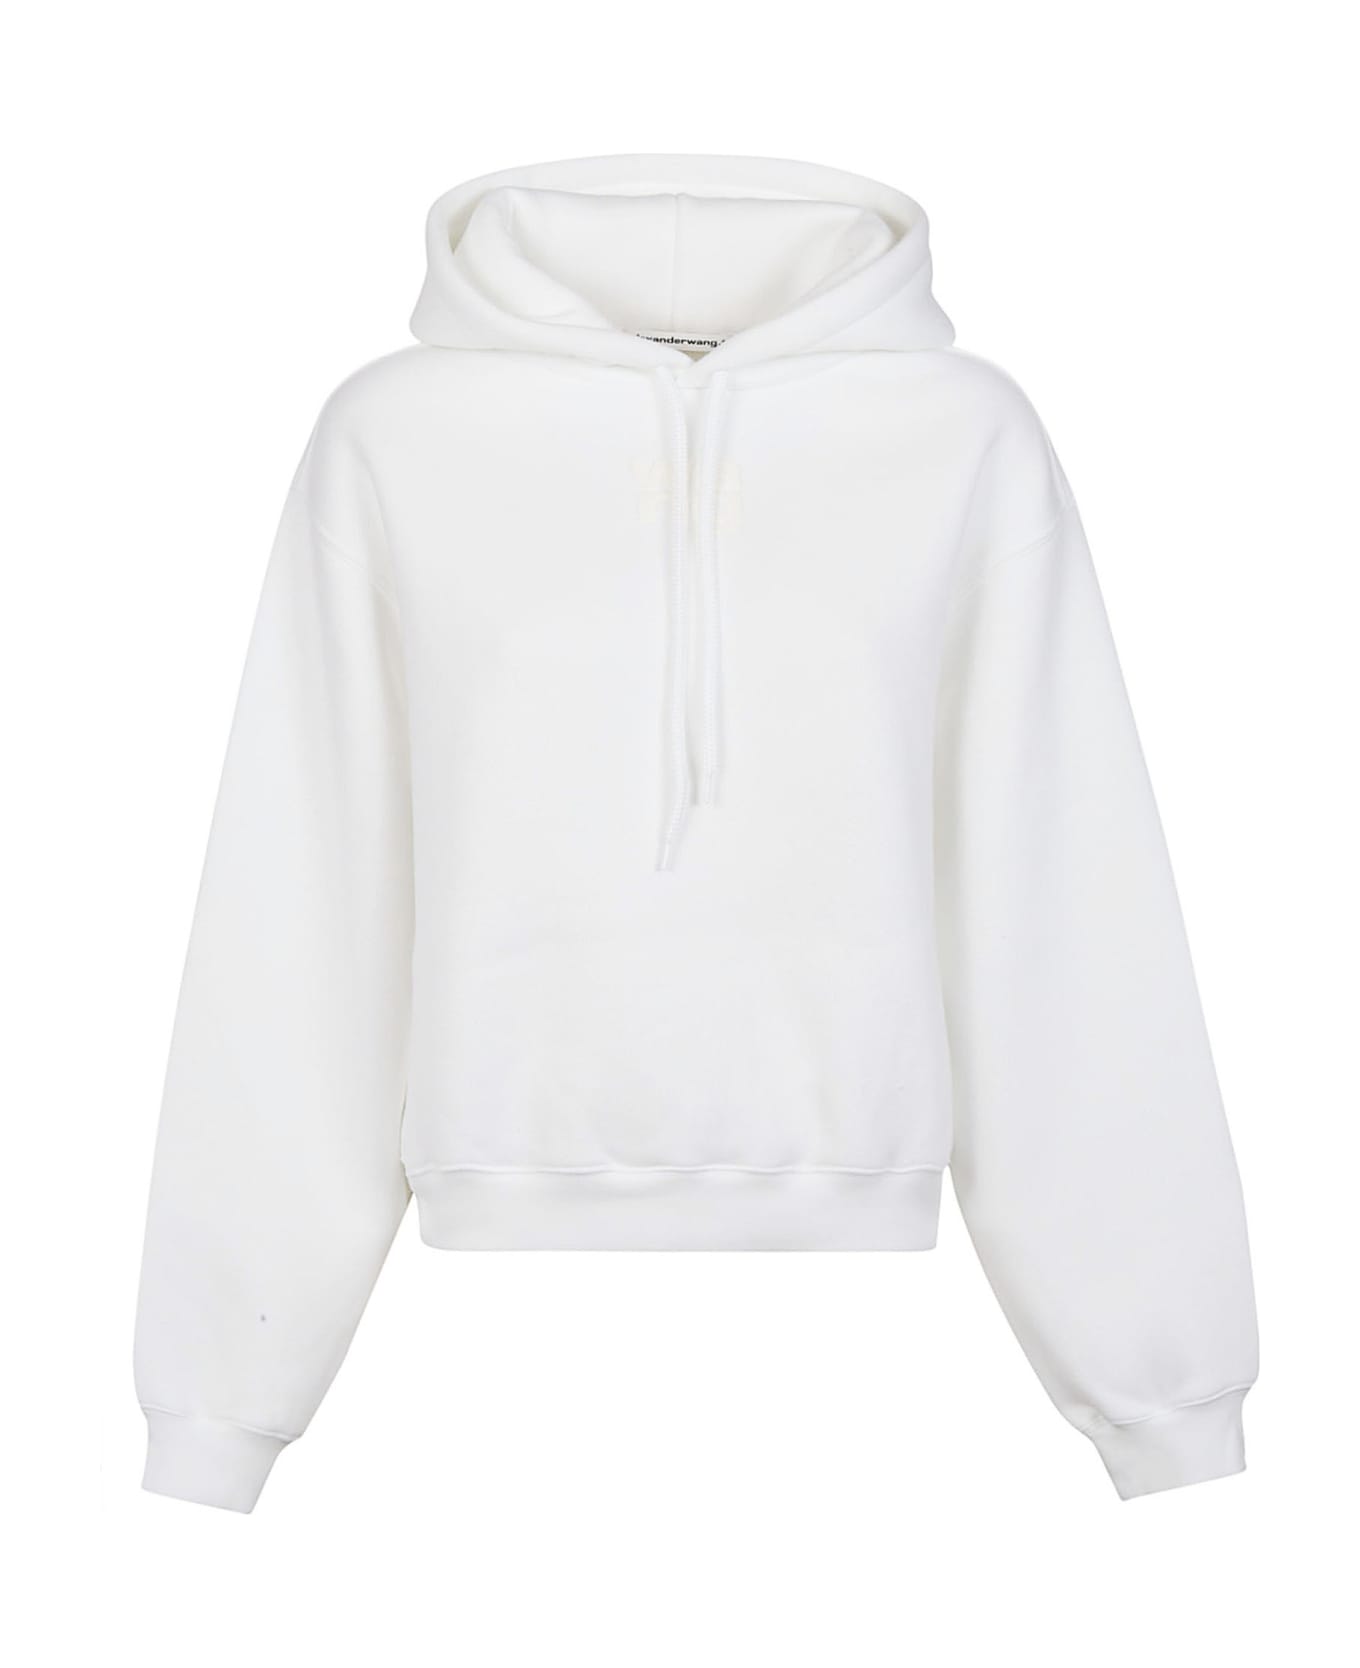 T by Alexander Wang Puff Paint Logo Essential Terry Sweatshirt - White